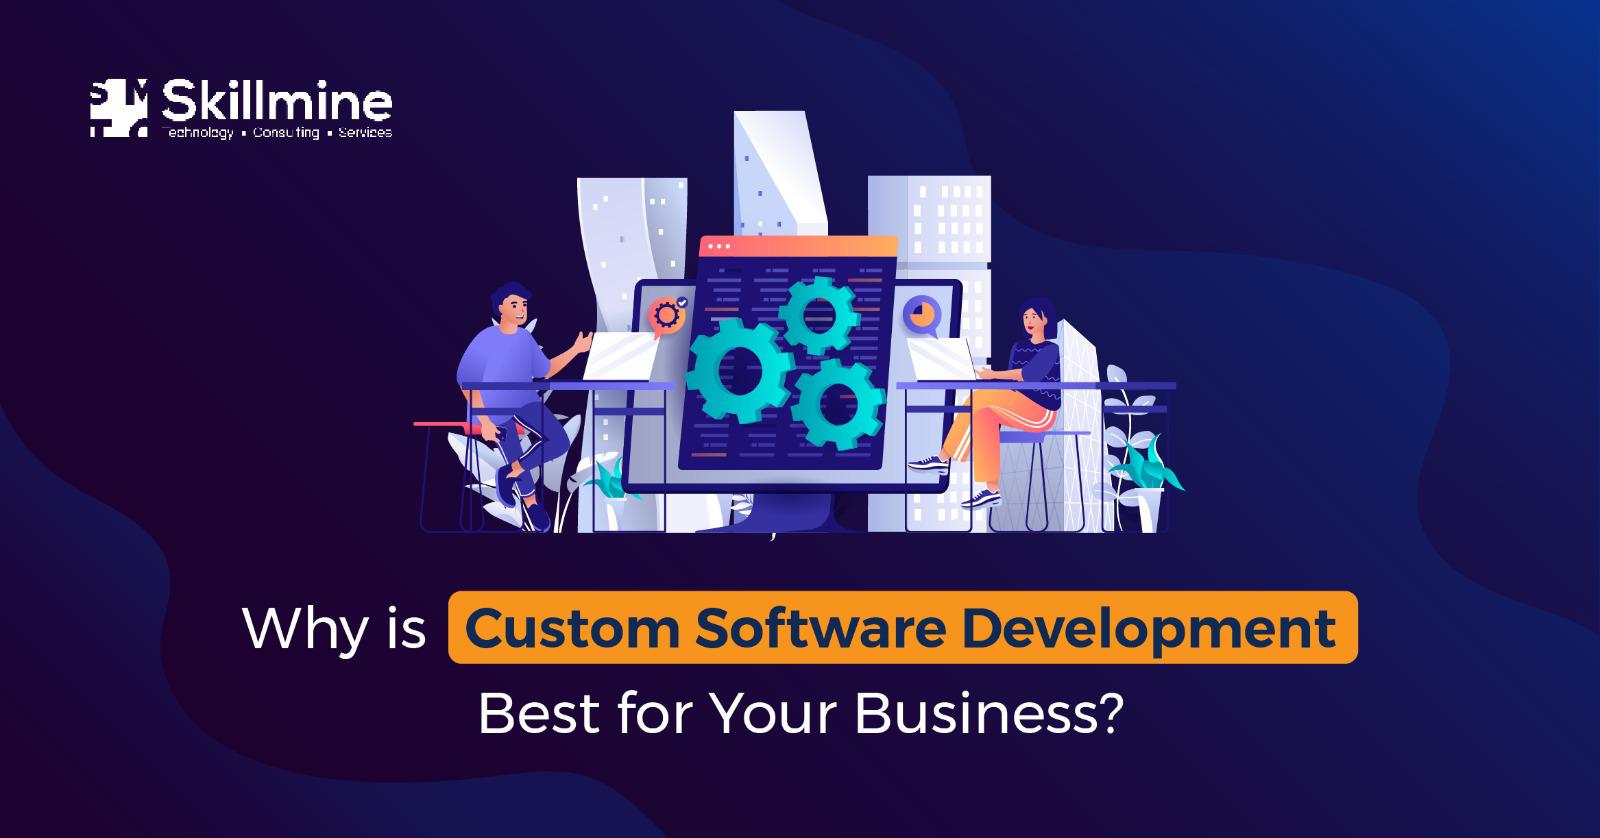 Why is Custom Software Development Best for Your Business